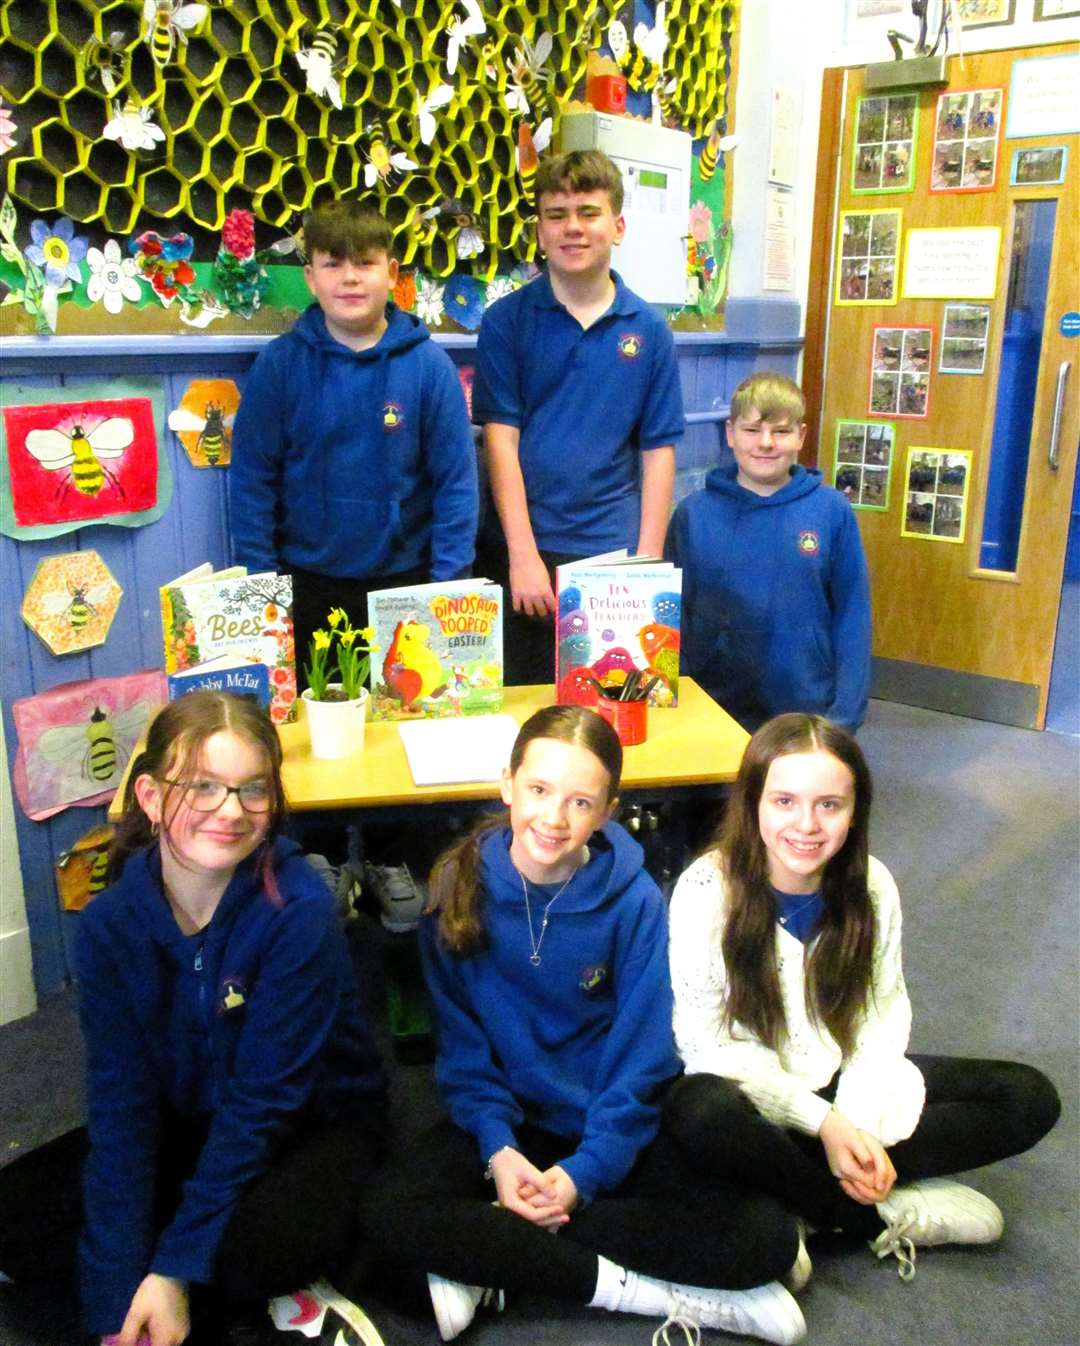 P7 volunteers welcomed all the readers in 'such a lovely and mannerly way' and escorted them to the different reading areas, said the headteacher.